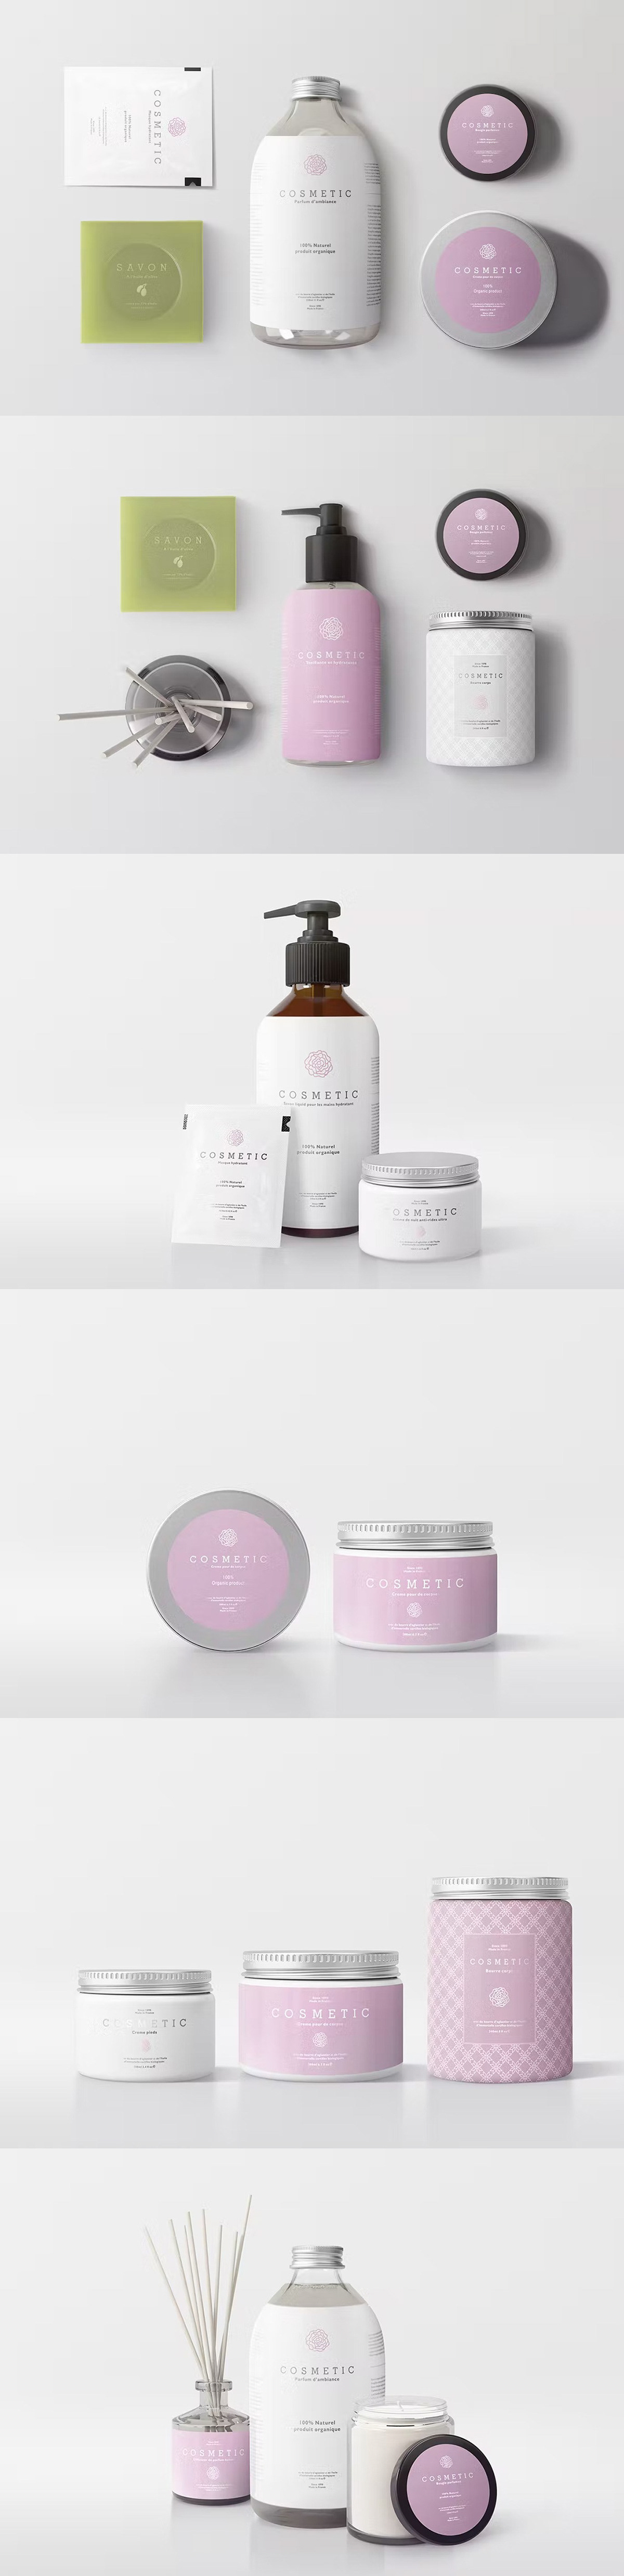 box Cosmetic cosmetics Mockup package package design  Packaging packaging design product skincare